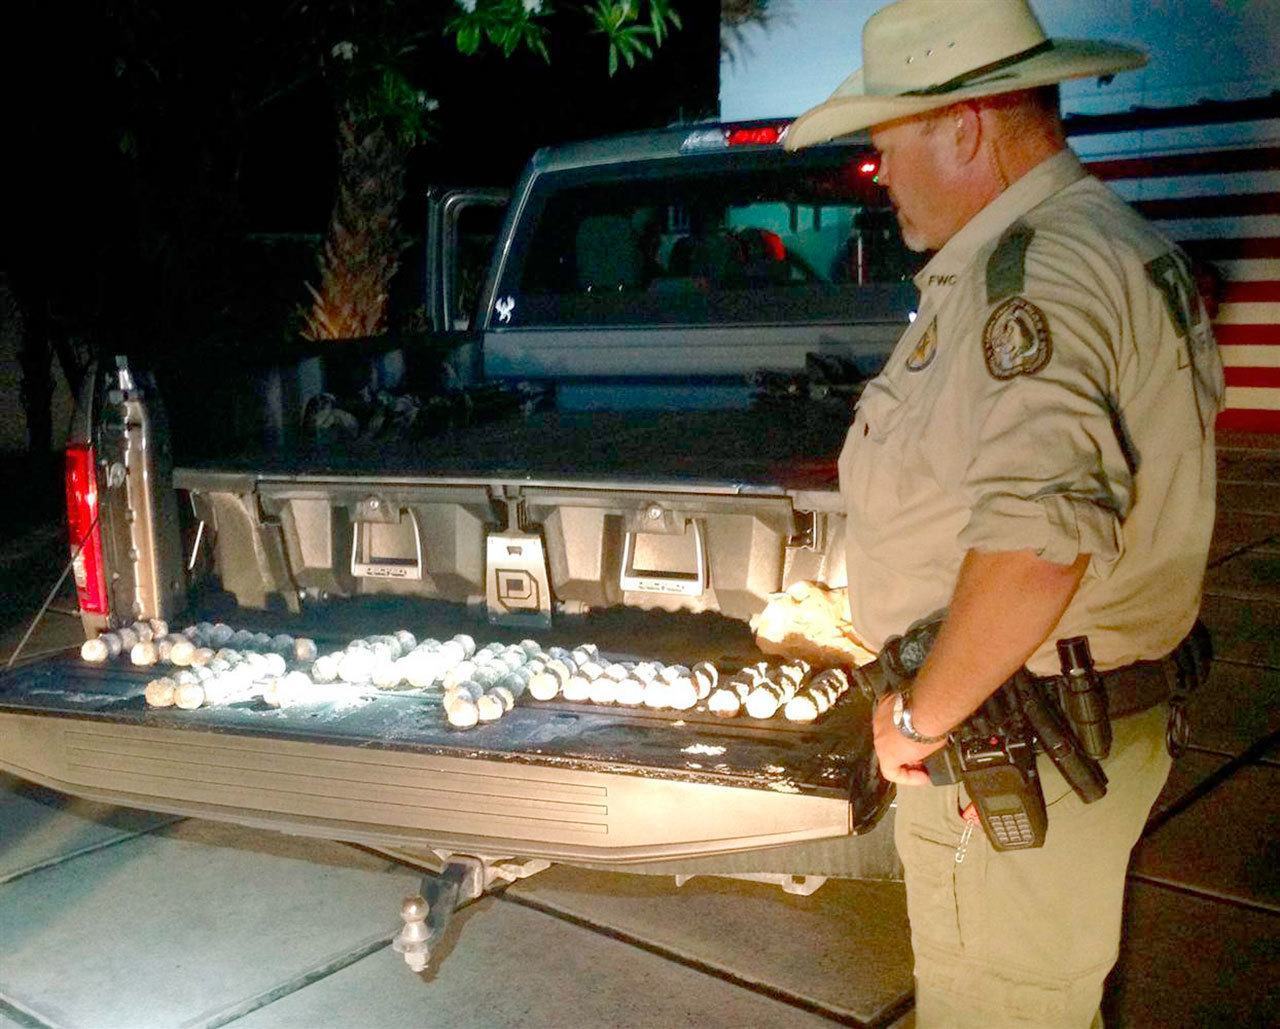 A Florida Fish and Wildlife Conservation officer observes a batch of loggerhead sea turtle eggs that were confiscated from Glenn Shaw after he was allegedly observed stealing the eggs from a beach behind a home on Jupiter Island. (Photo courtesy of Florida Fish and Wildlife Conservation)